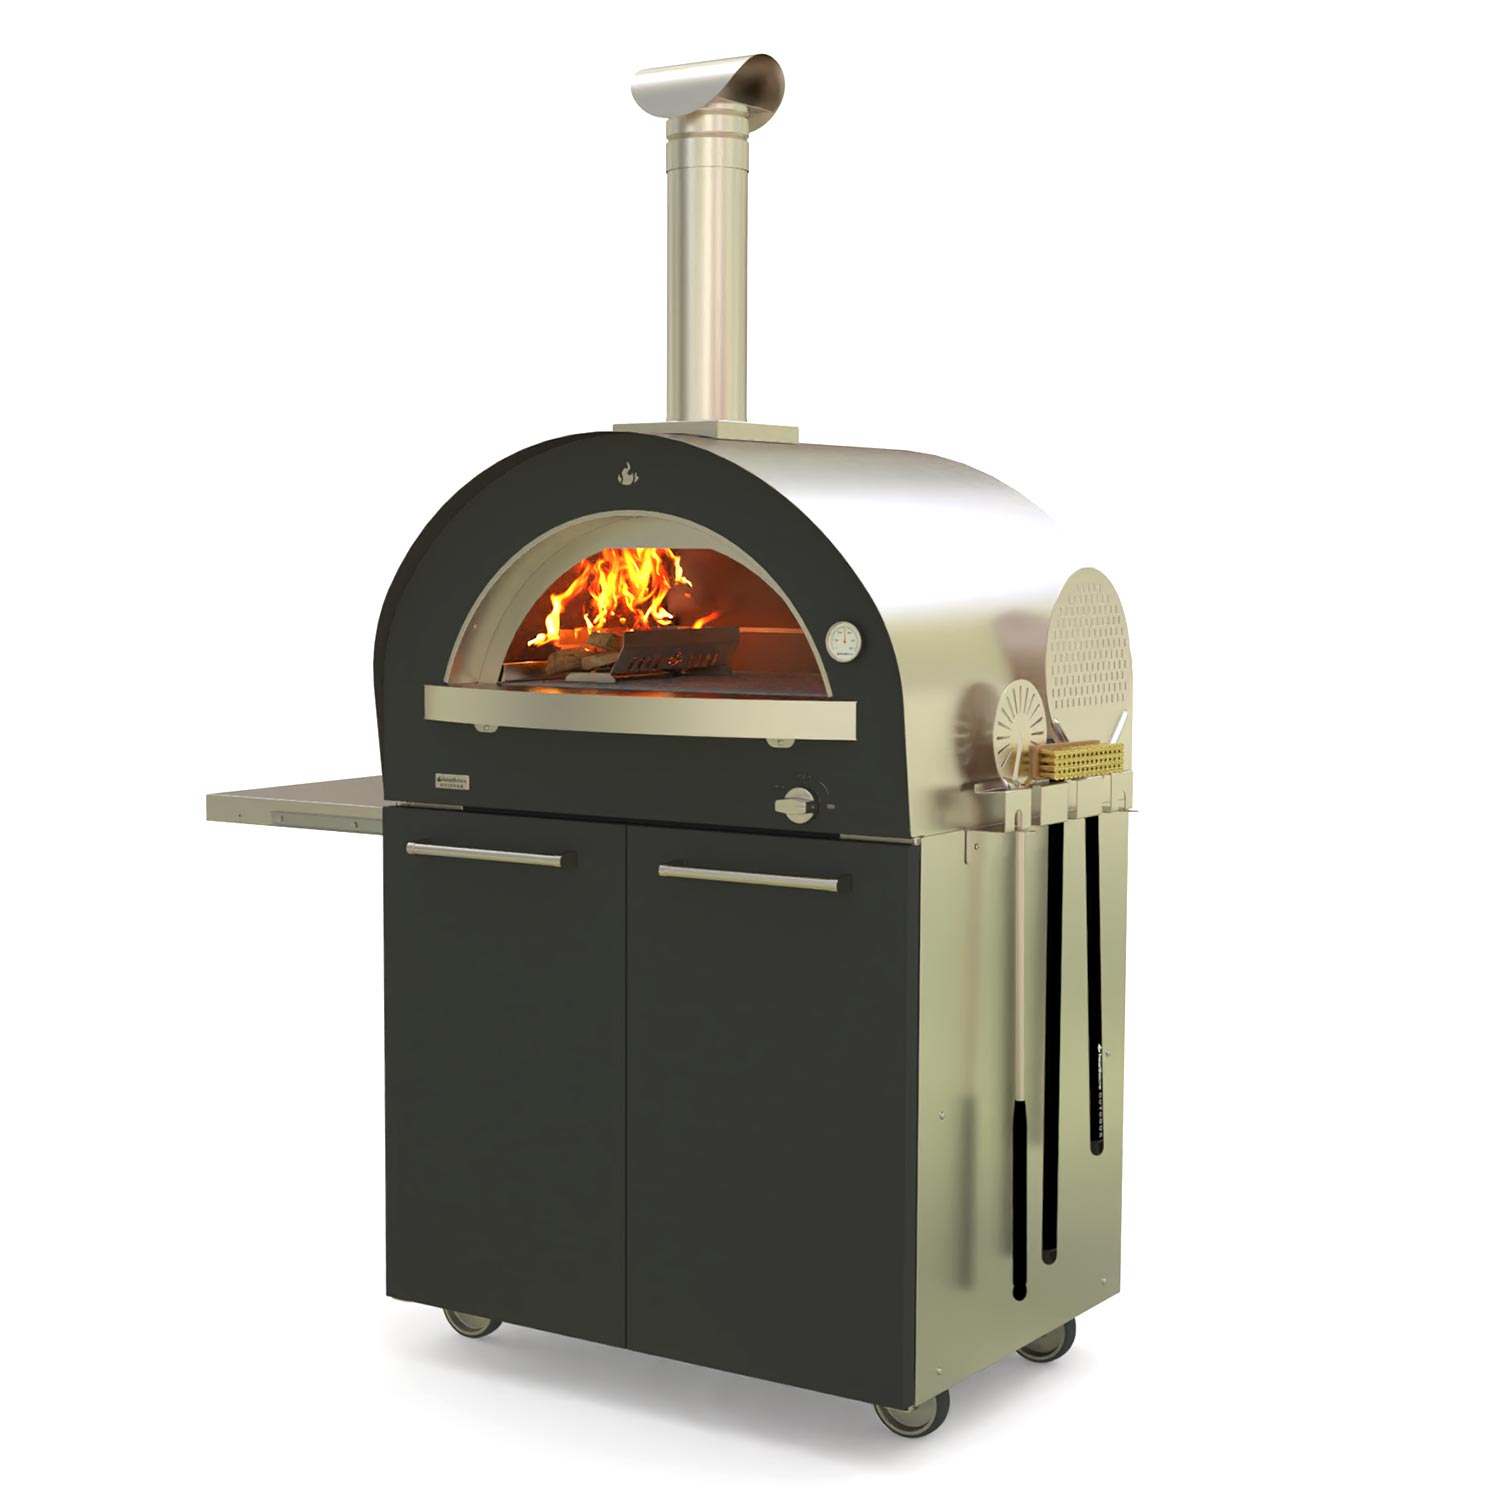 Genio Multi-Fuel Pizza Oven 4.9 with Rolling Base (Stainless/Black)